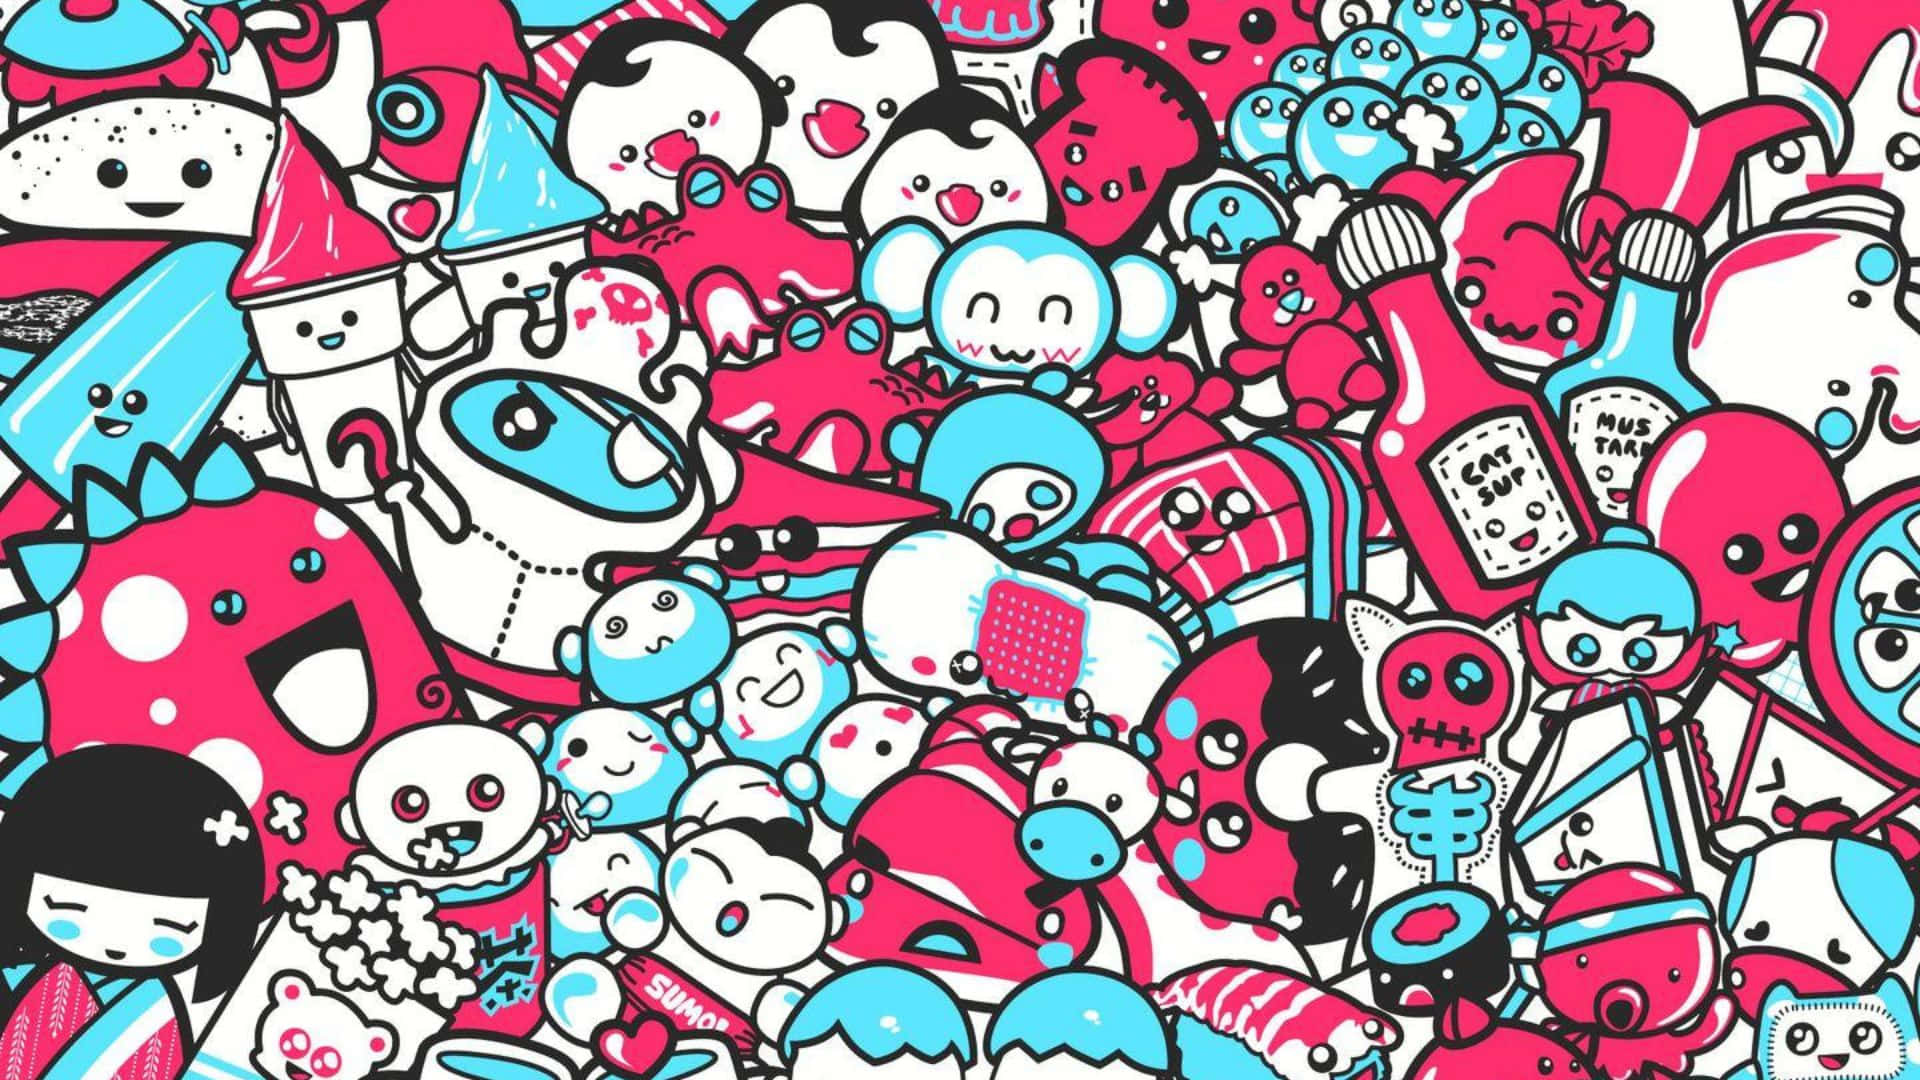 Adorable Kawaii Monster with Big Eyes and Bright Colors Wallpaper